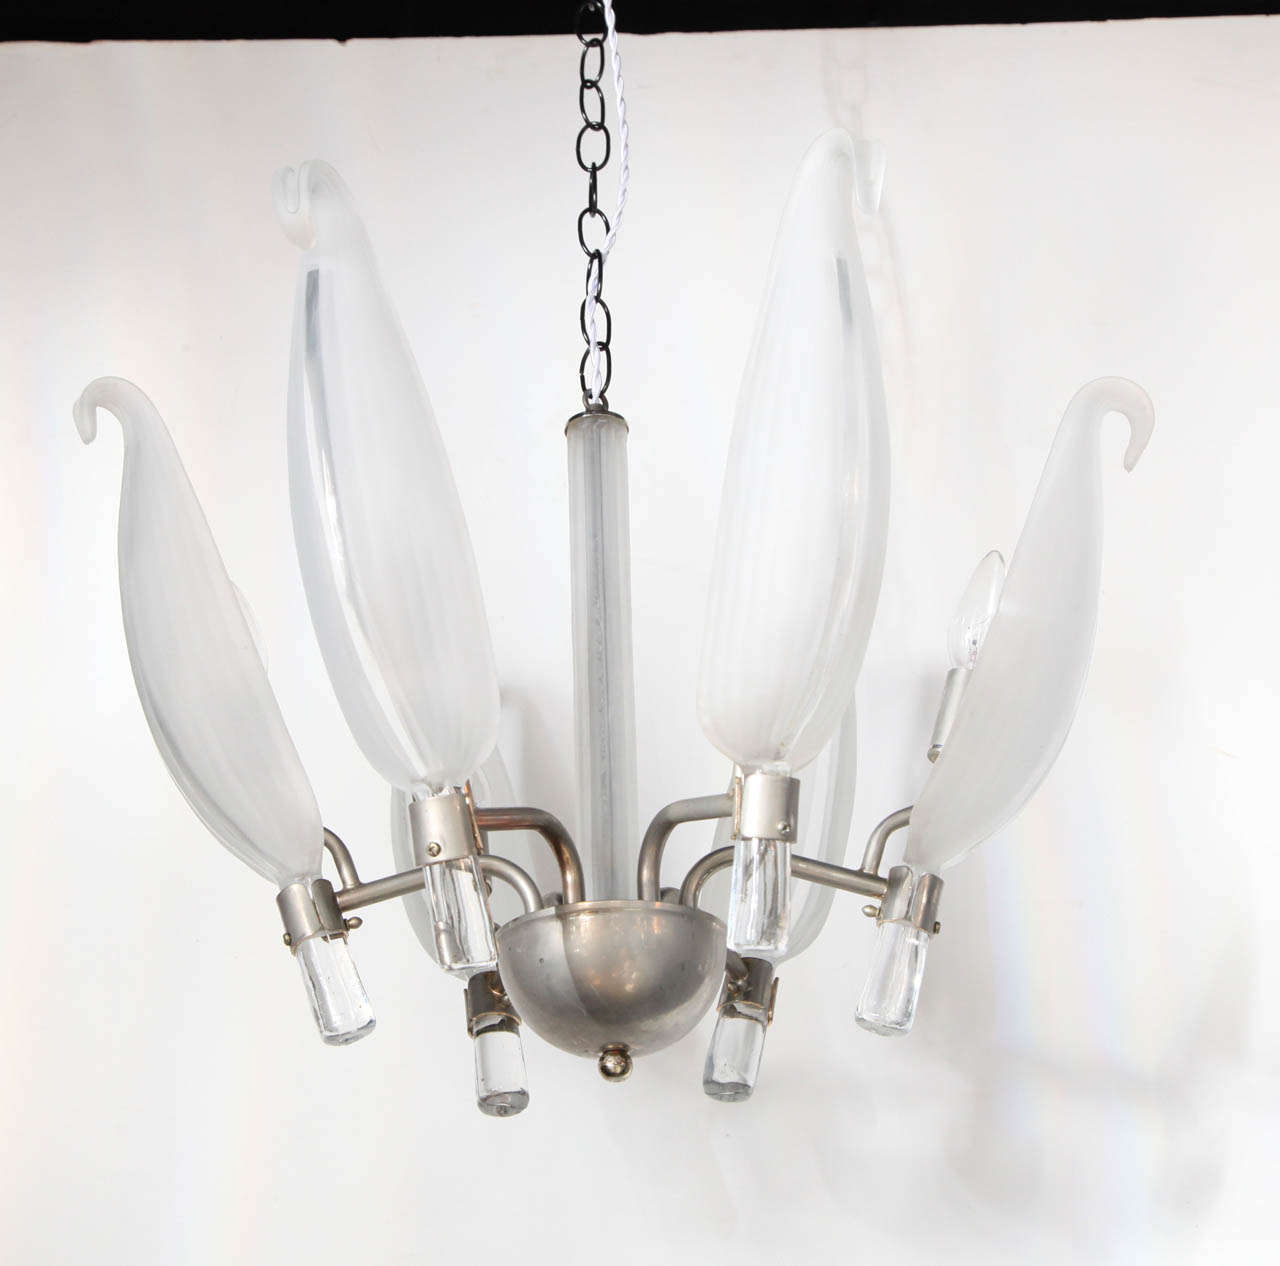 Art Deco Revival Murano Glass and Nickel Plate Chandelier by Franco Luce. Featuring a cylindrical White frosted center column with six frosted Murano Glass leaf shades and clear Grass stem detail.  With Nickel Plated Brass hardware. Utilizes